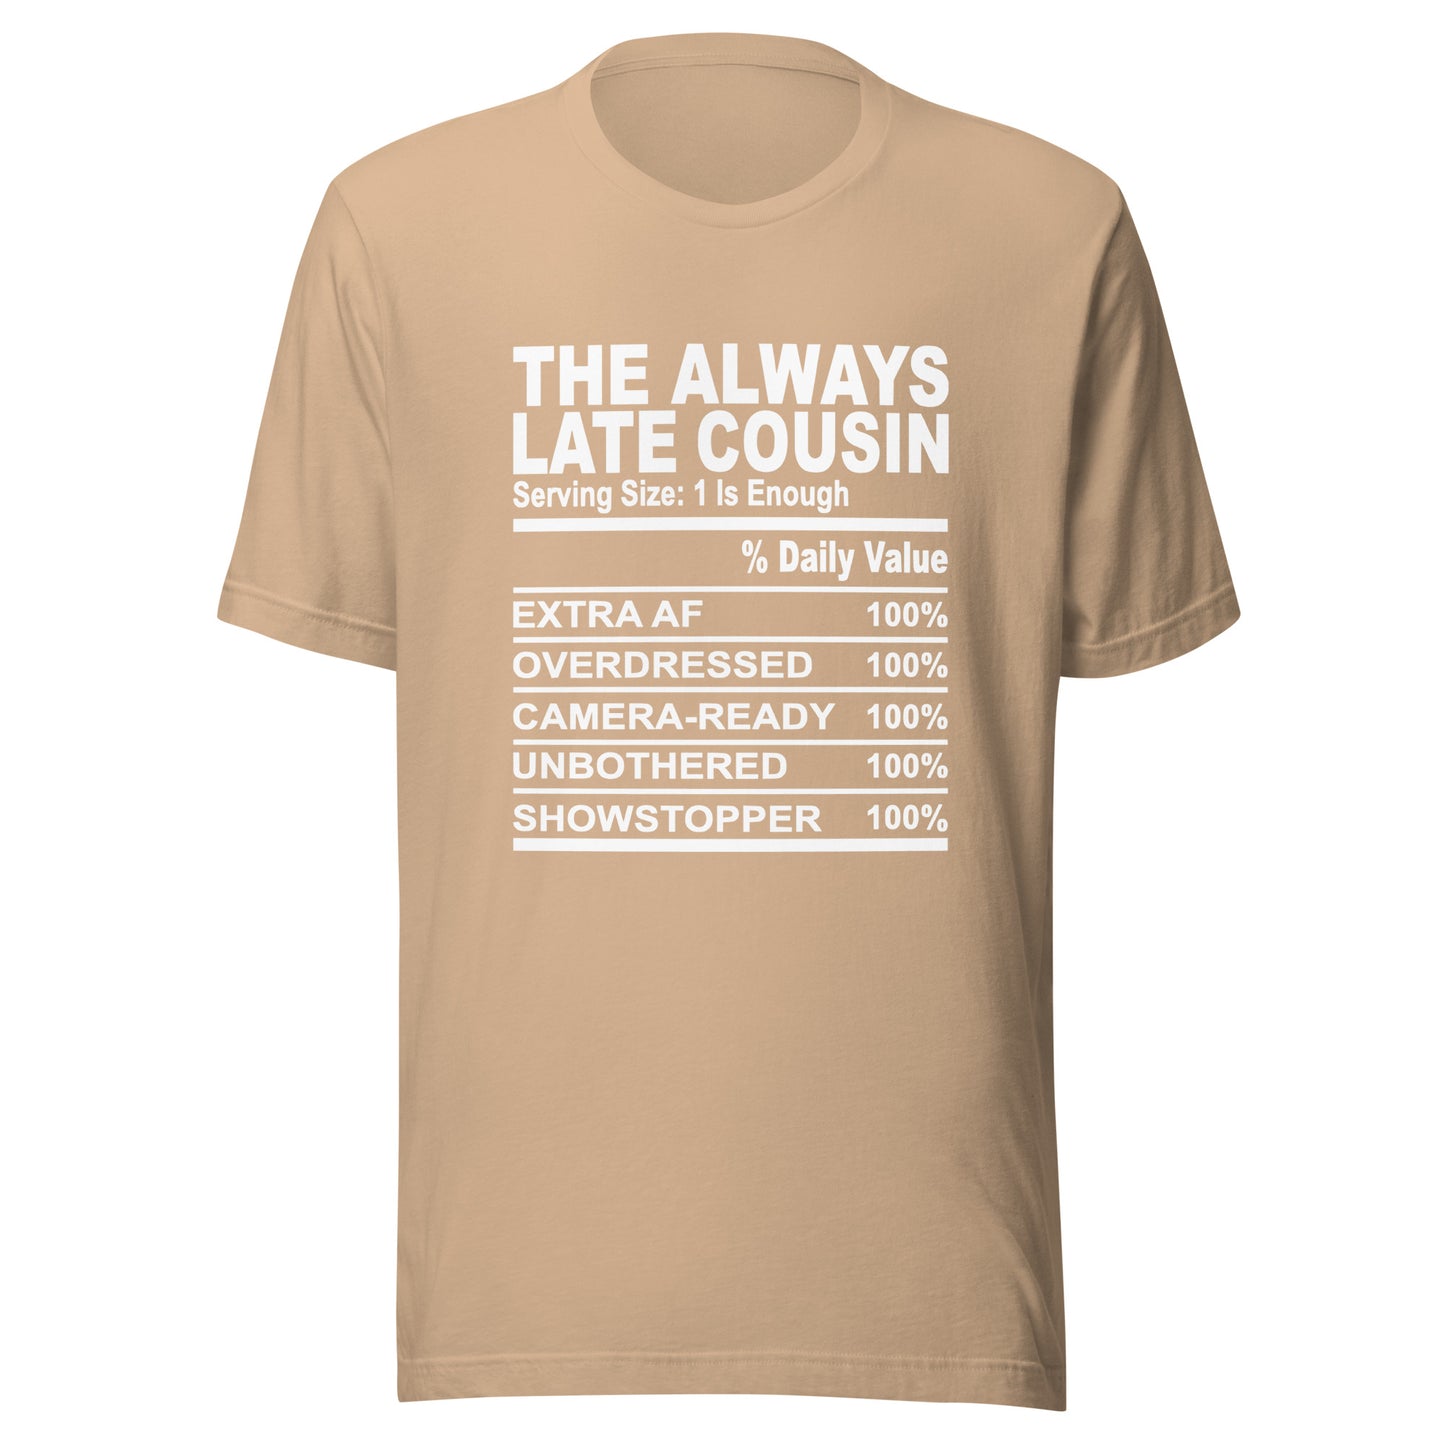 THE ALWAYS LATE COUSIN - S-M - Unisex T-Shirt (white print)